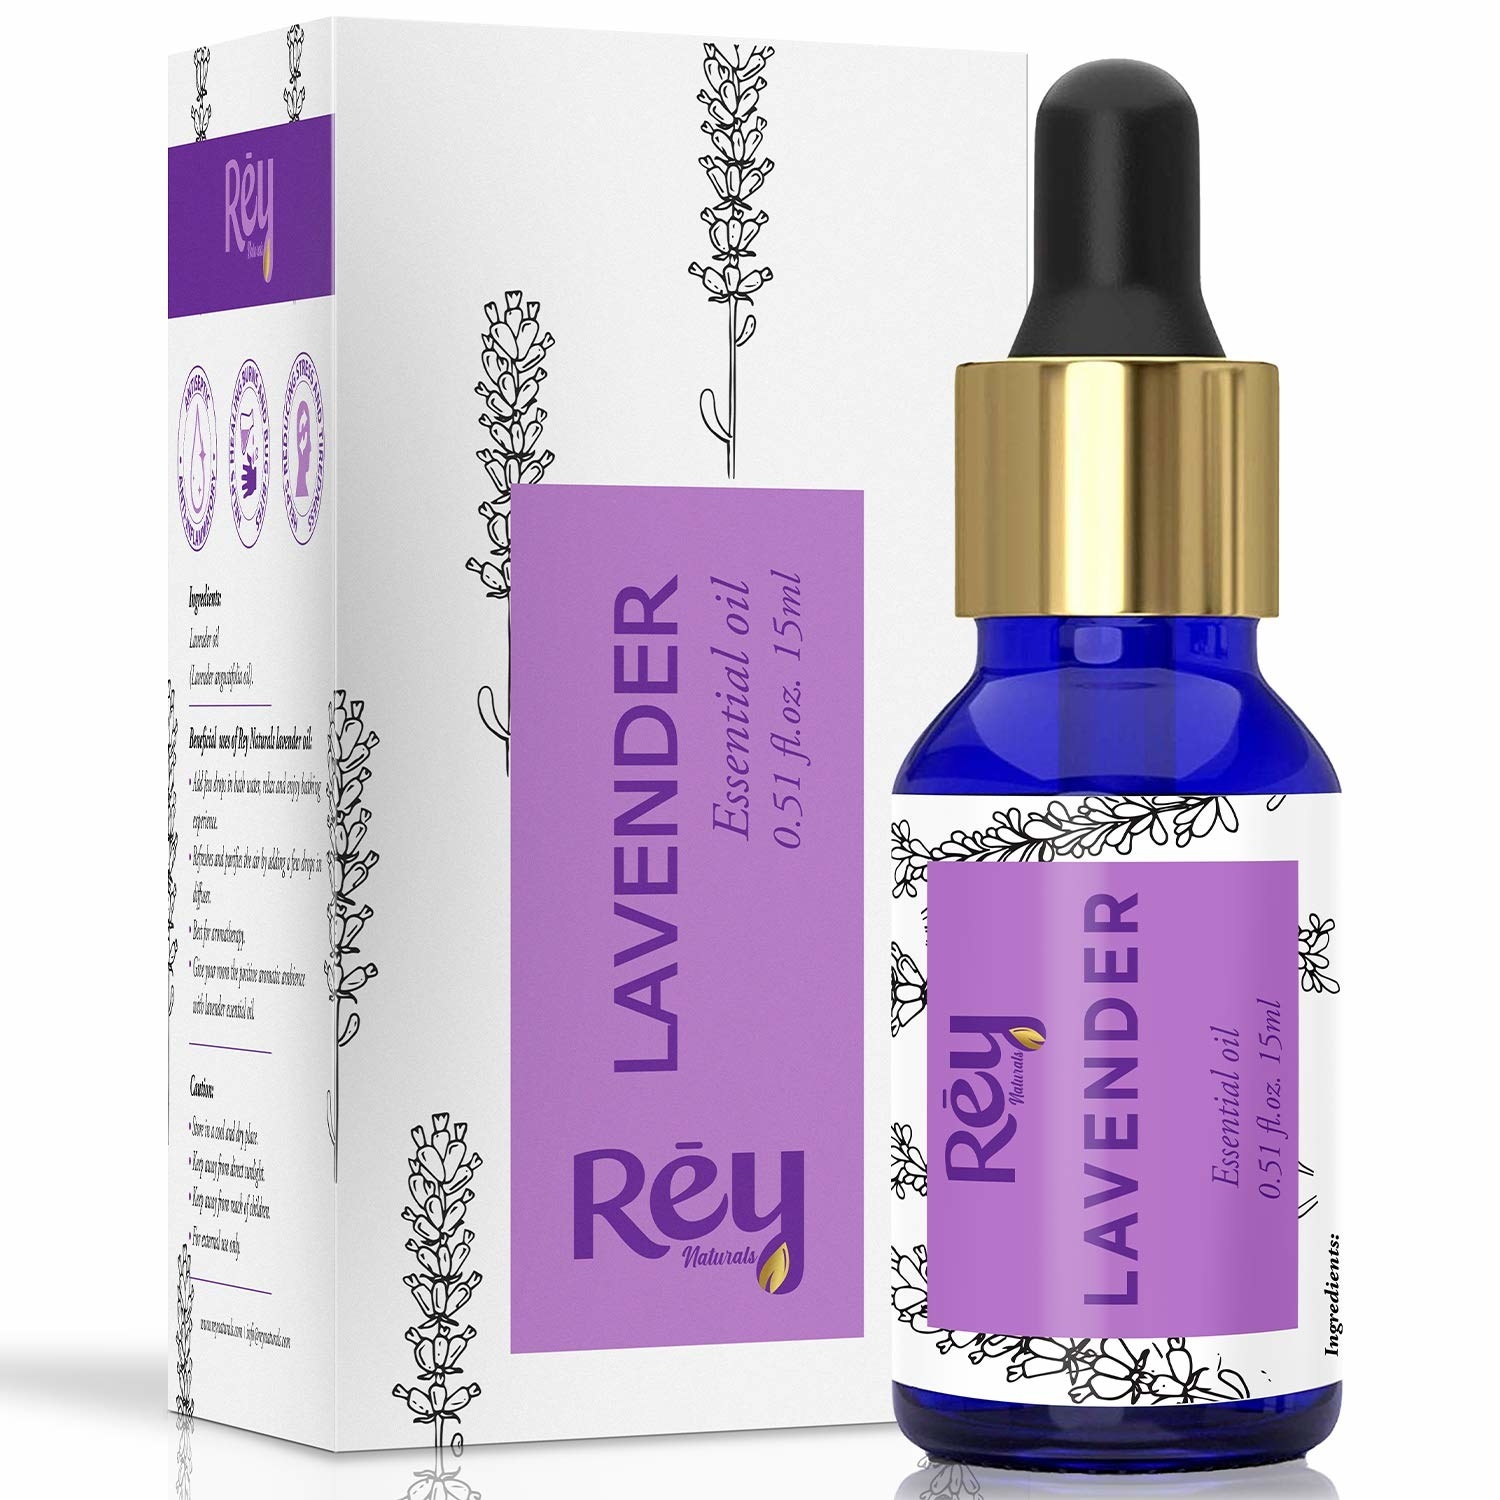 Packaging of the lavender essential oil